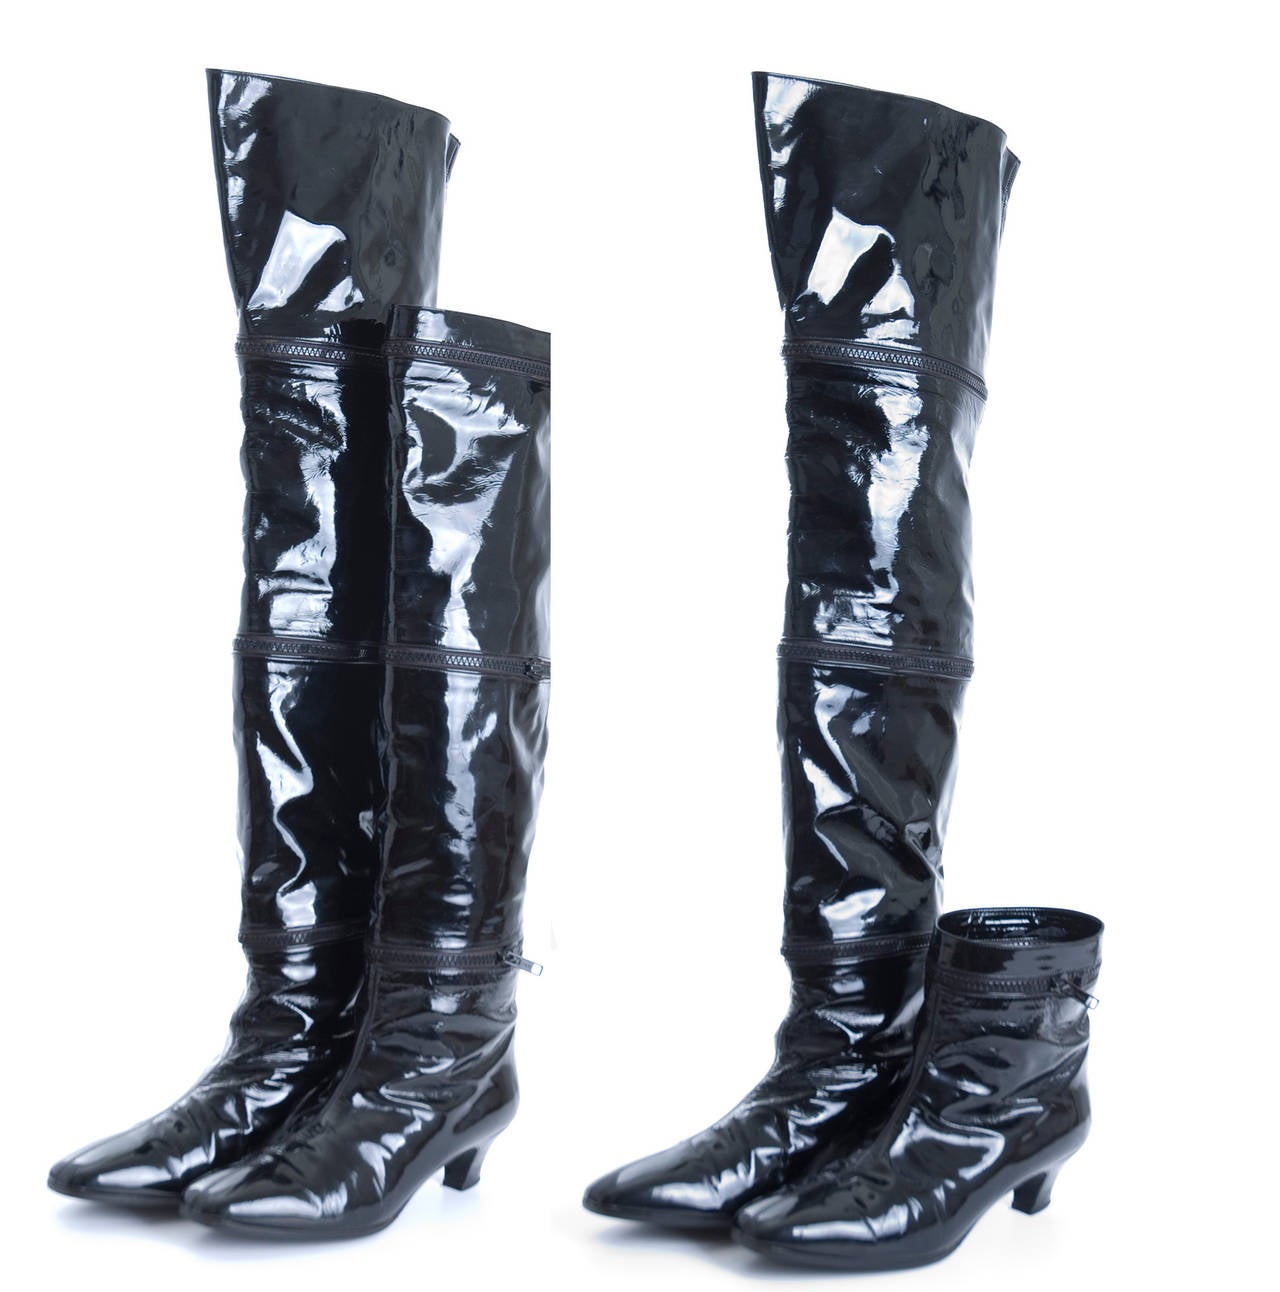 Vintage Mario Valentino Overknee Boots wearable in 4 length.
8 small straps fit on every length to finish the edge.
Black patent leather.
They have been worn but they are in very good condition.
Size 7.5  or 37.5

Note to offer: Buyer pays for